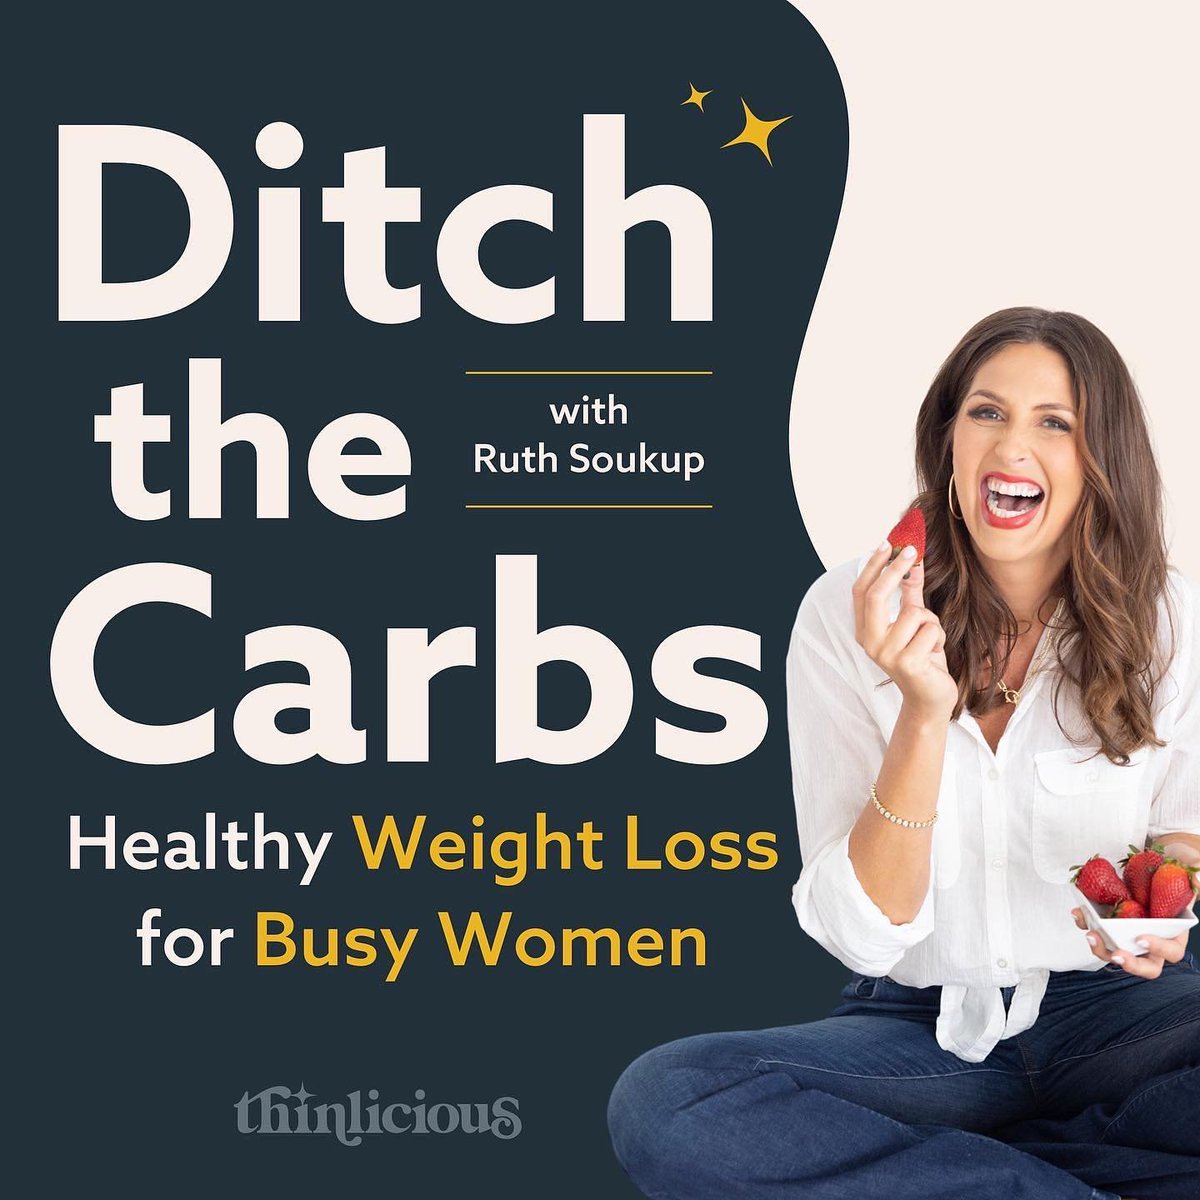 Our new podcast launched TODAY & we can’t wait for you to listen! Learn how owner, @RuthSoukup lost 40lbs and kept it off! #keto #lowcarb Find it on Apple Podcasts, Spotify or wherever you like to listen by searching for “Ditch the Carbs!'